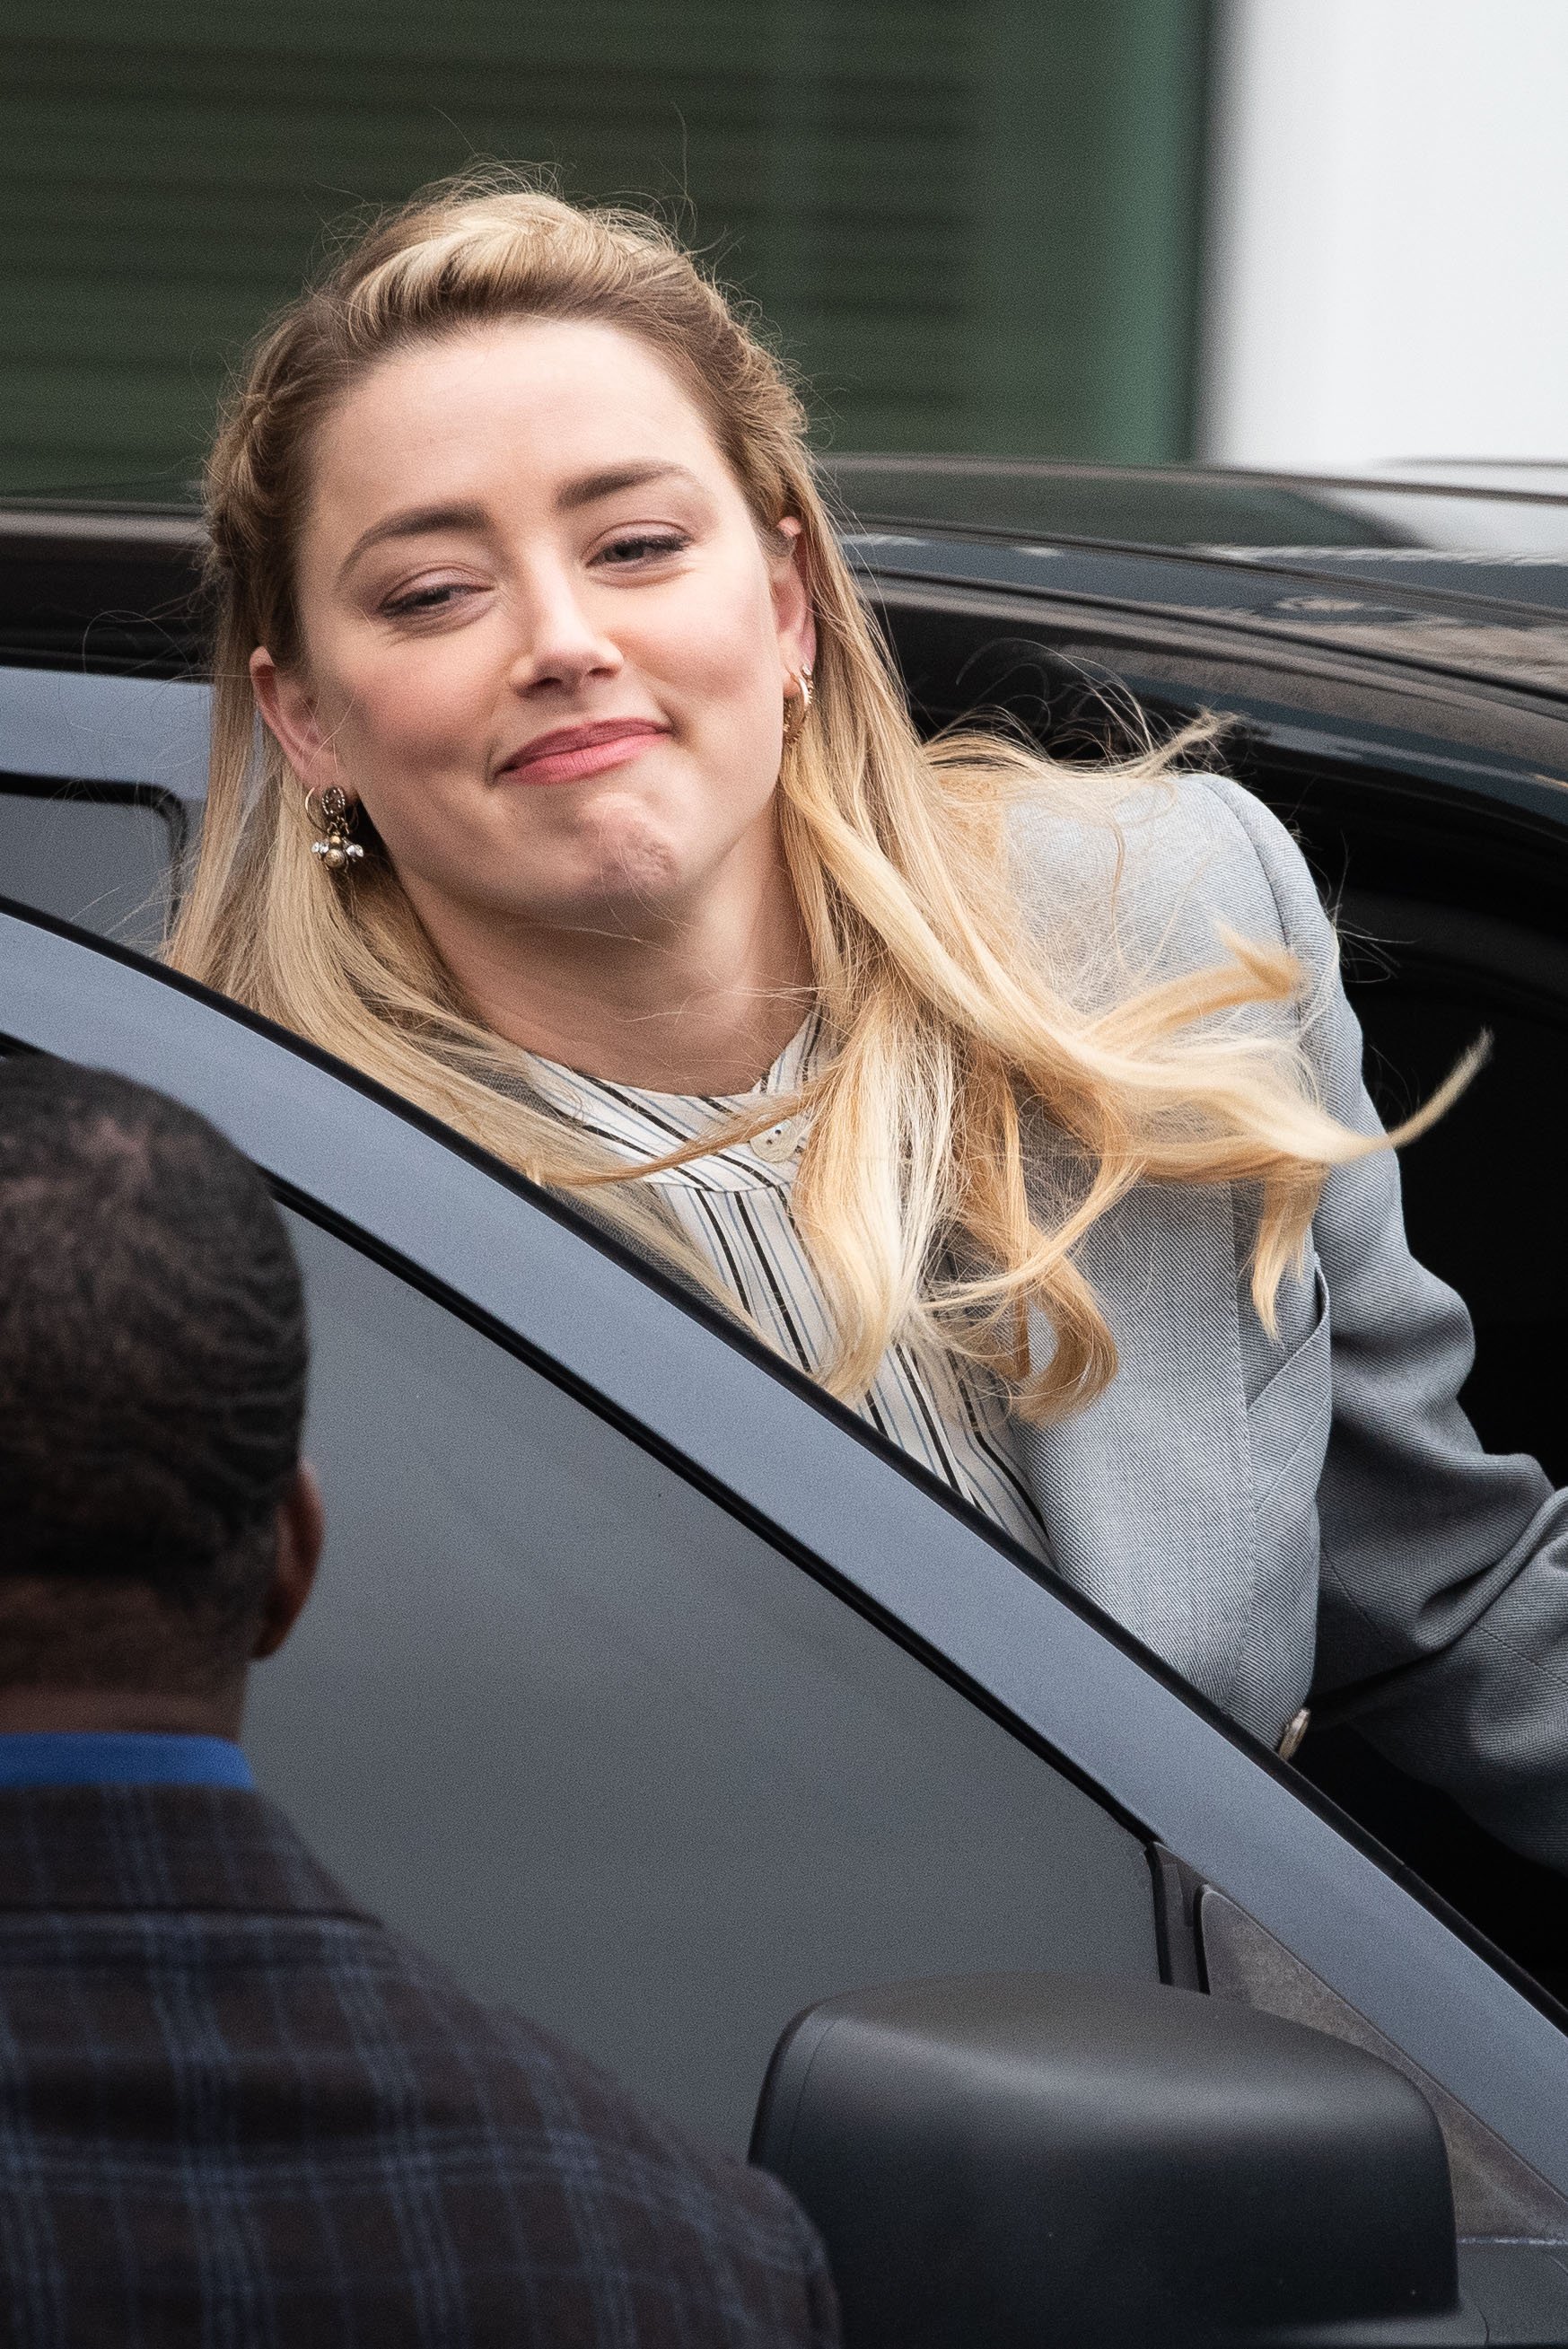  Amber Heard leaves court during the civil trial at Fairfax County Circuit Court on May 27, 2022, in Fairfax, Virginia | Source: Getty Images